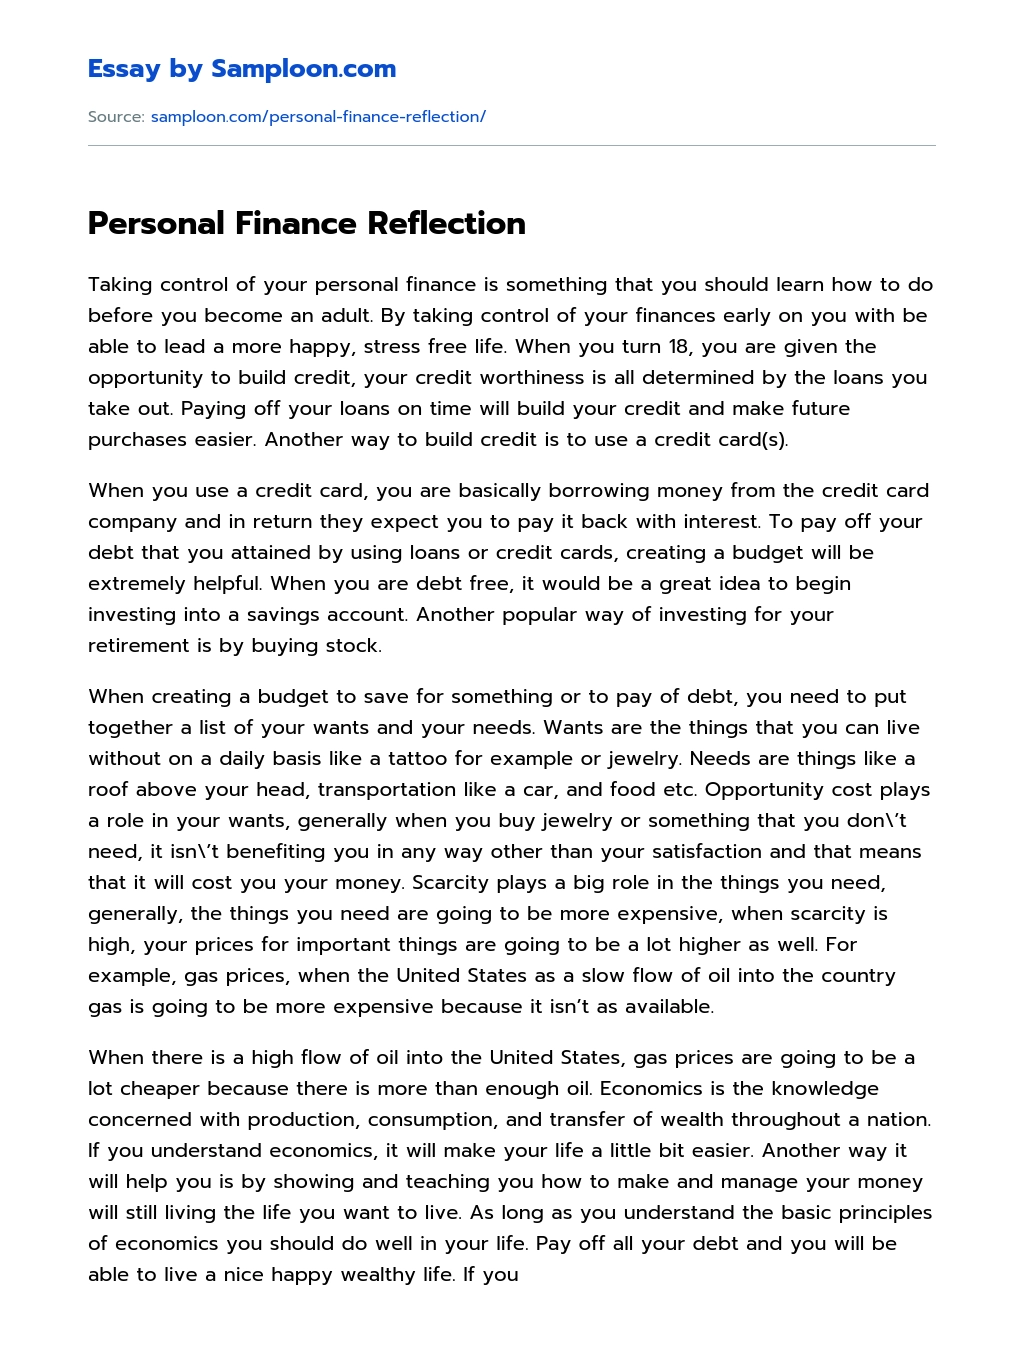 Personal Finance Reflection essay